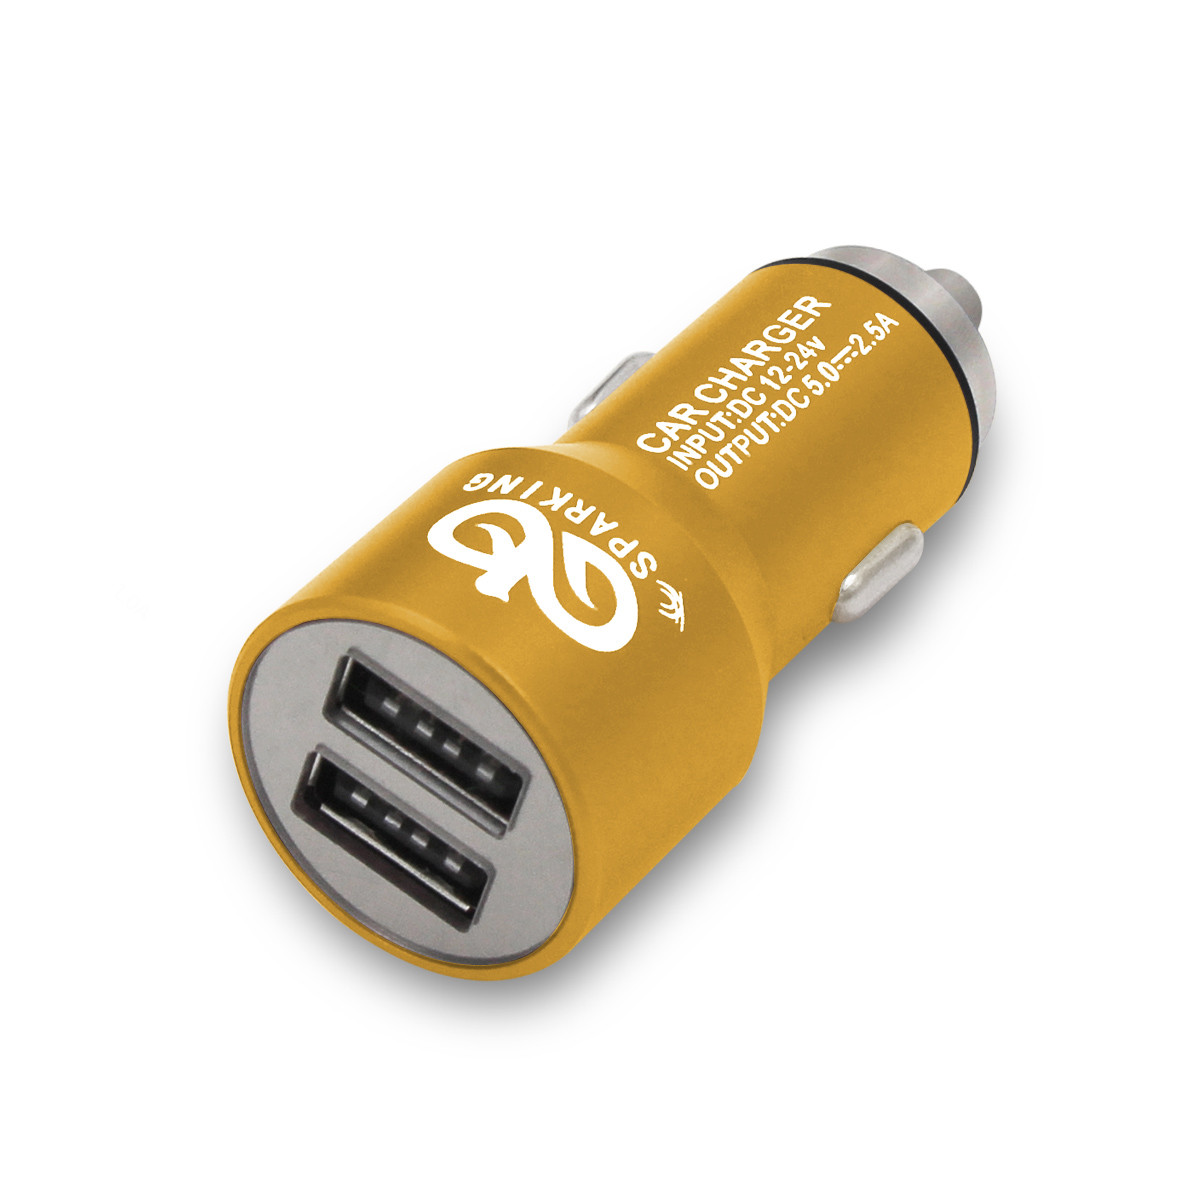 mini high performance dual car USB charger with over chargeing protection